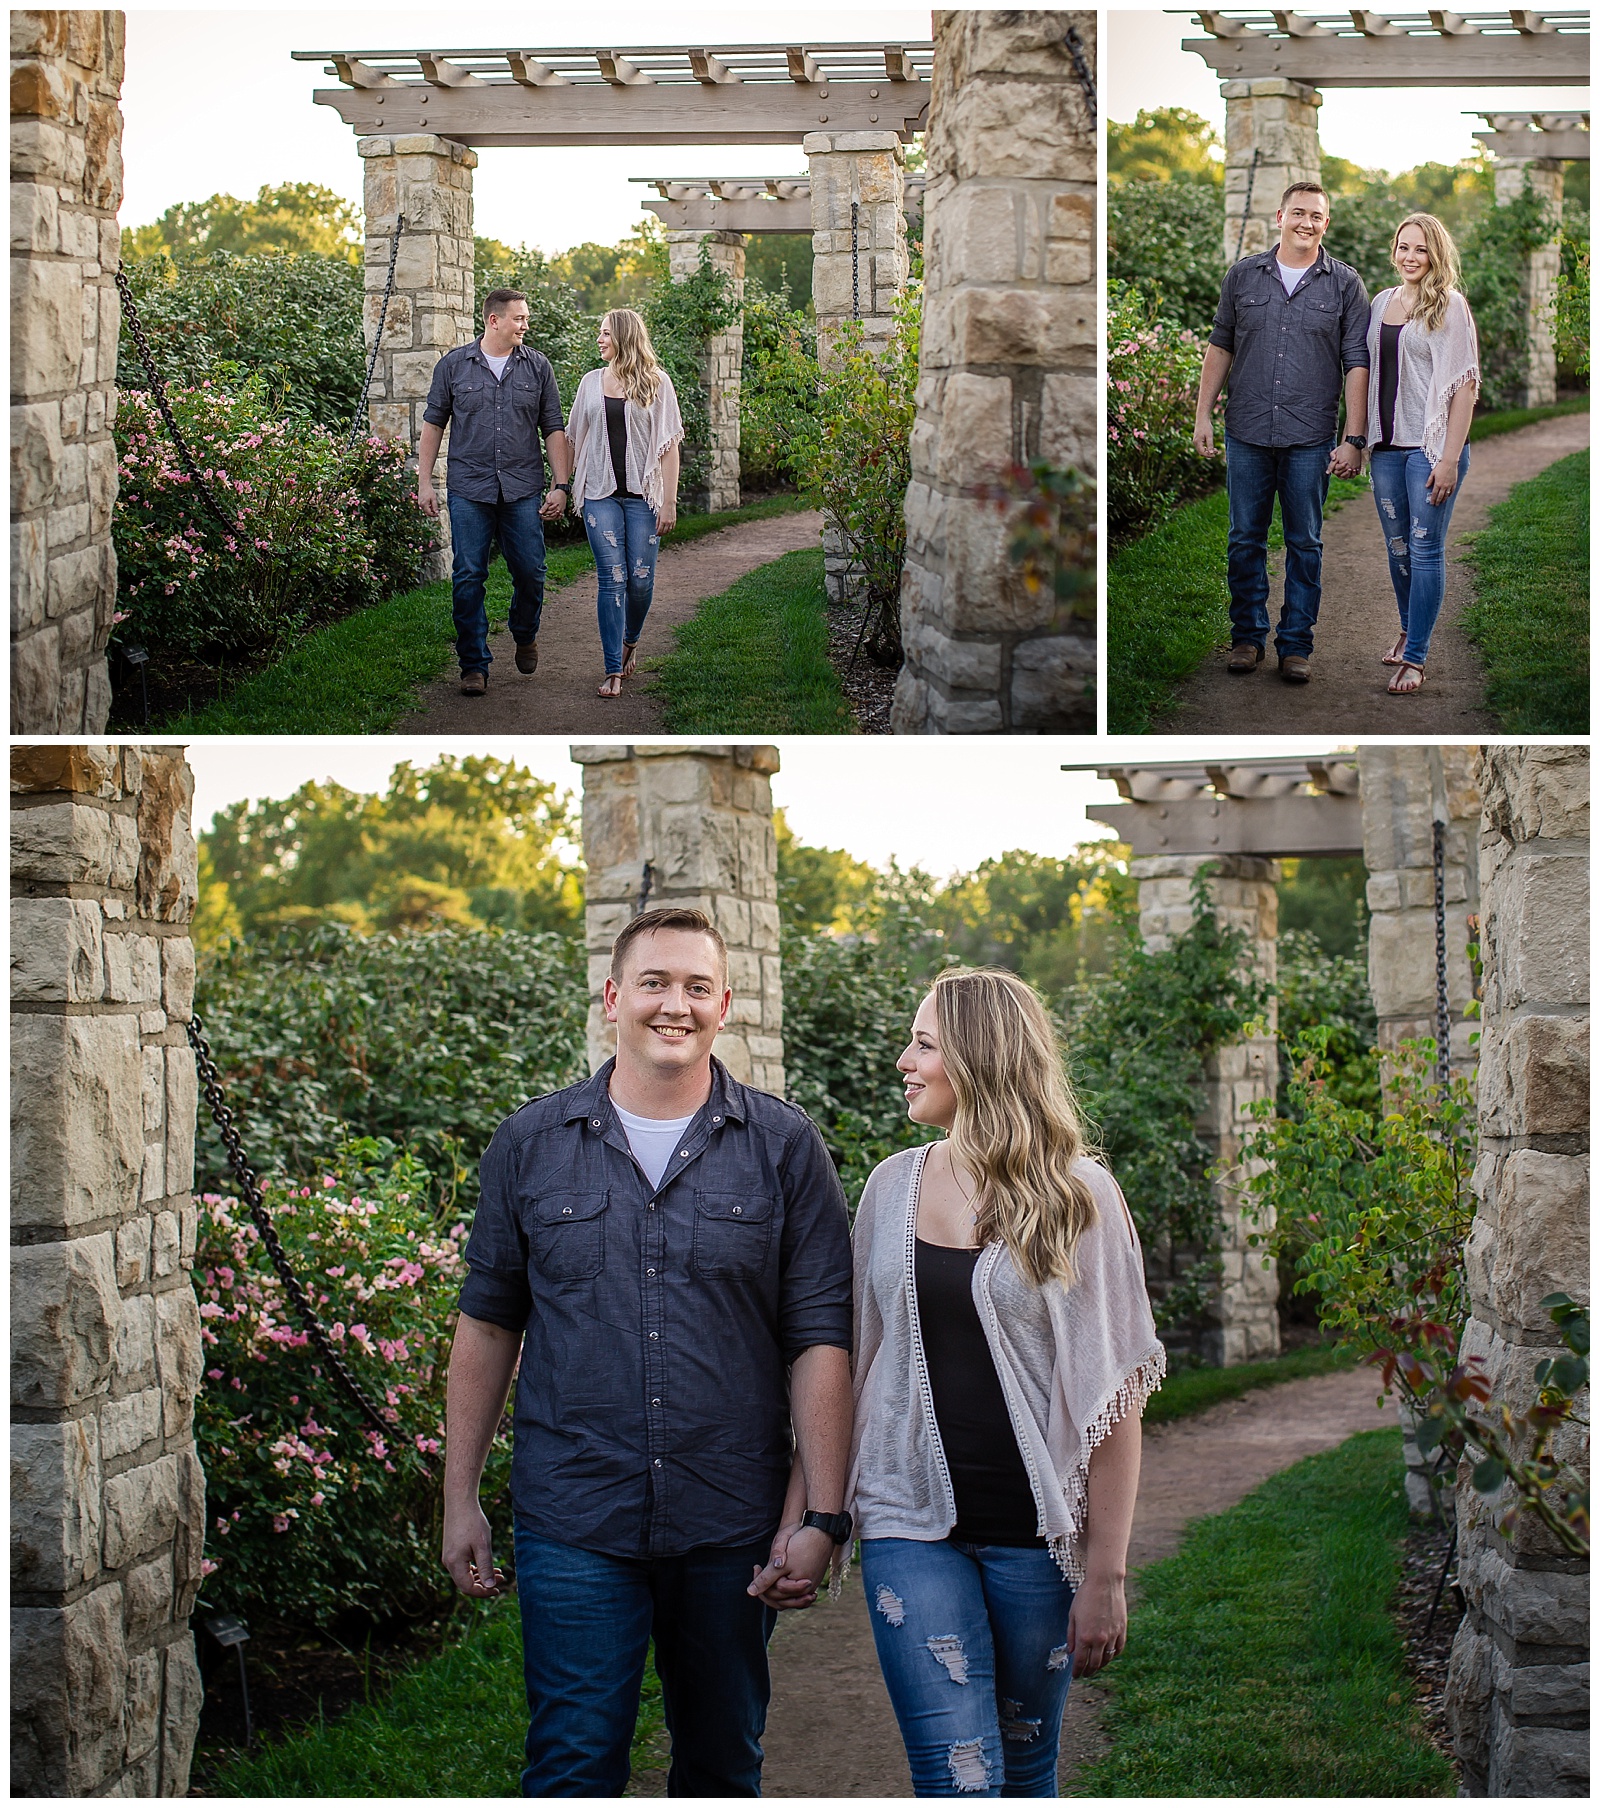 An engagement session at Loose Park in Kansas City.